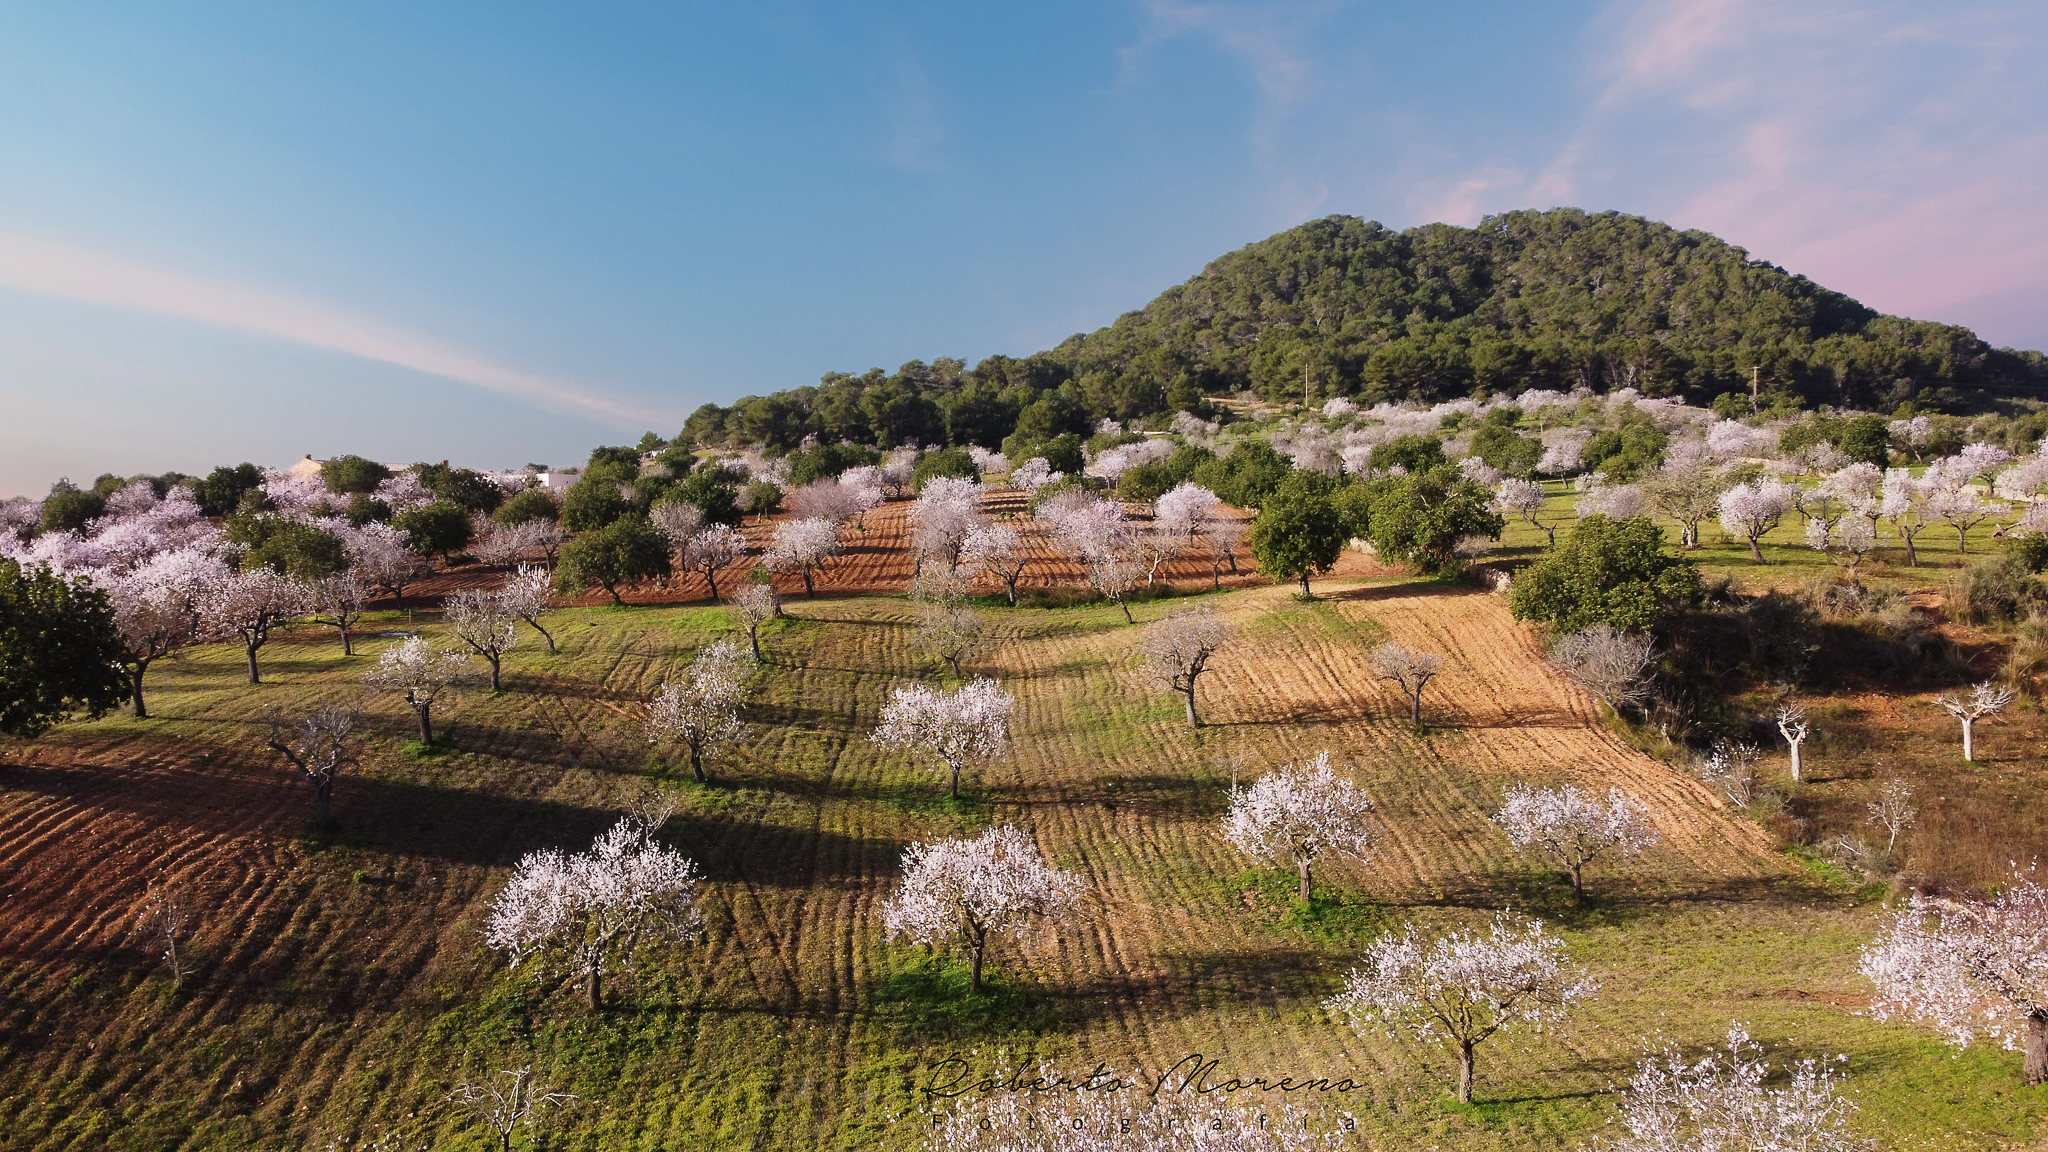 Almond trees in the forest